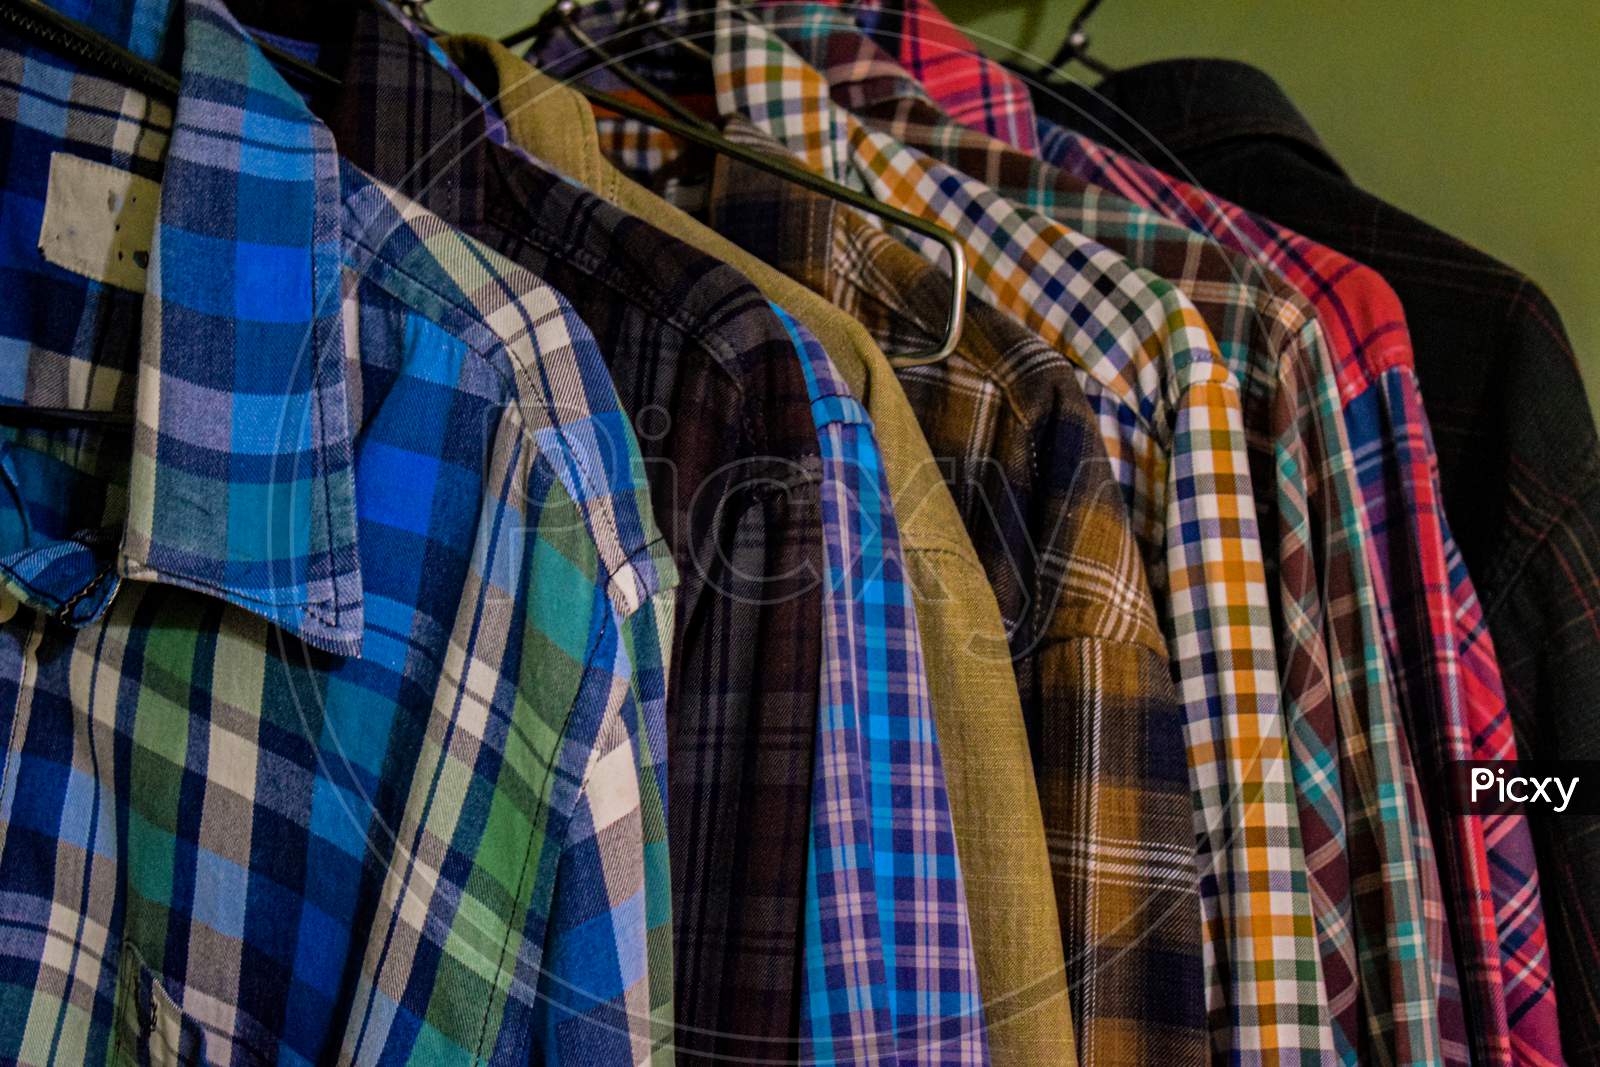 Collection Of Different Types And Colors Of Men Shirts In Wardrobe.